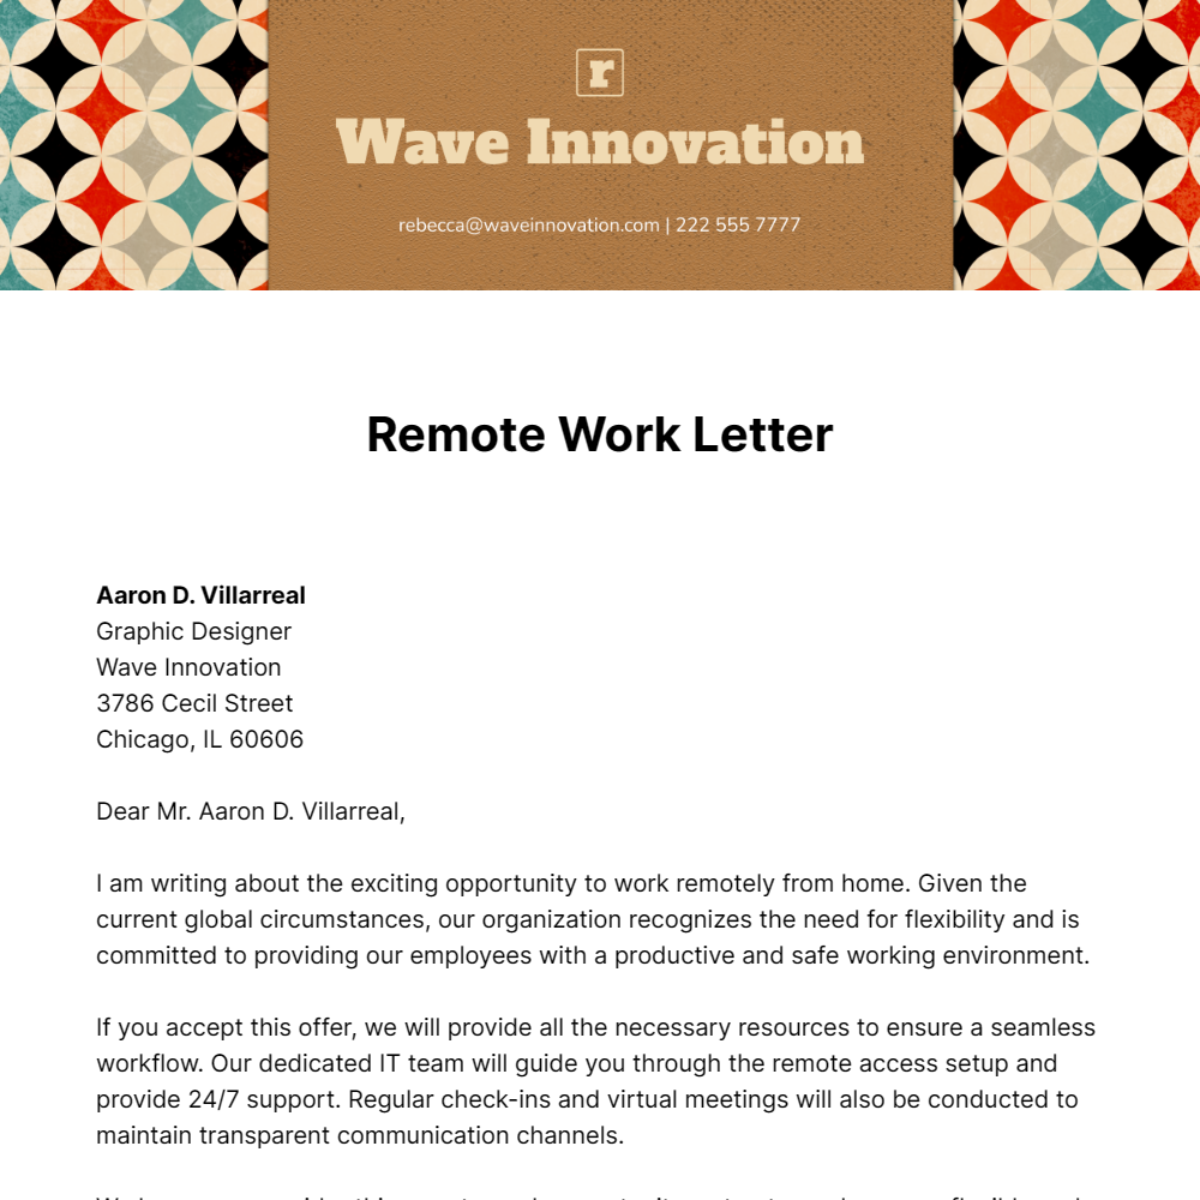 Remote Work Letter   Template